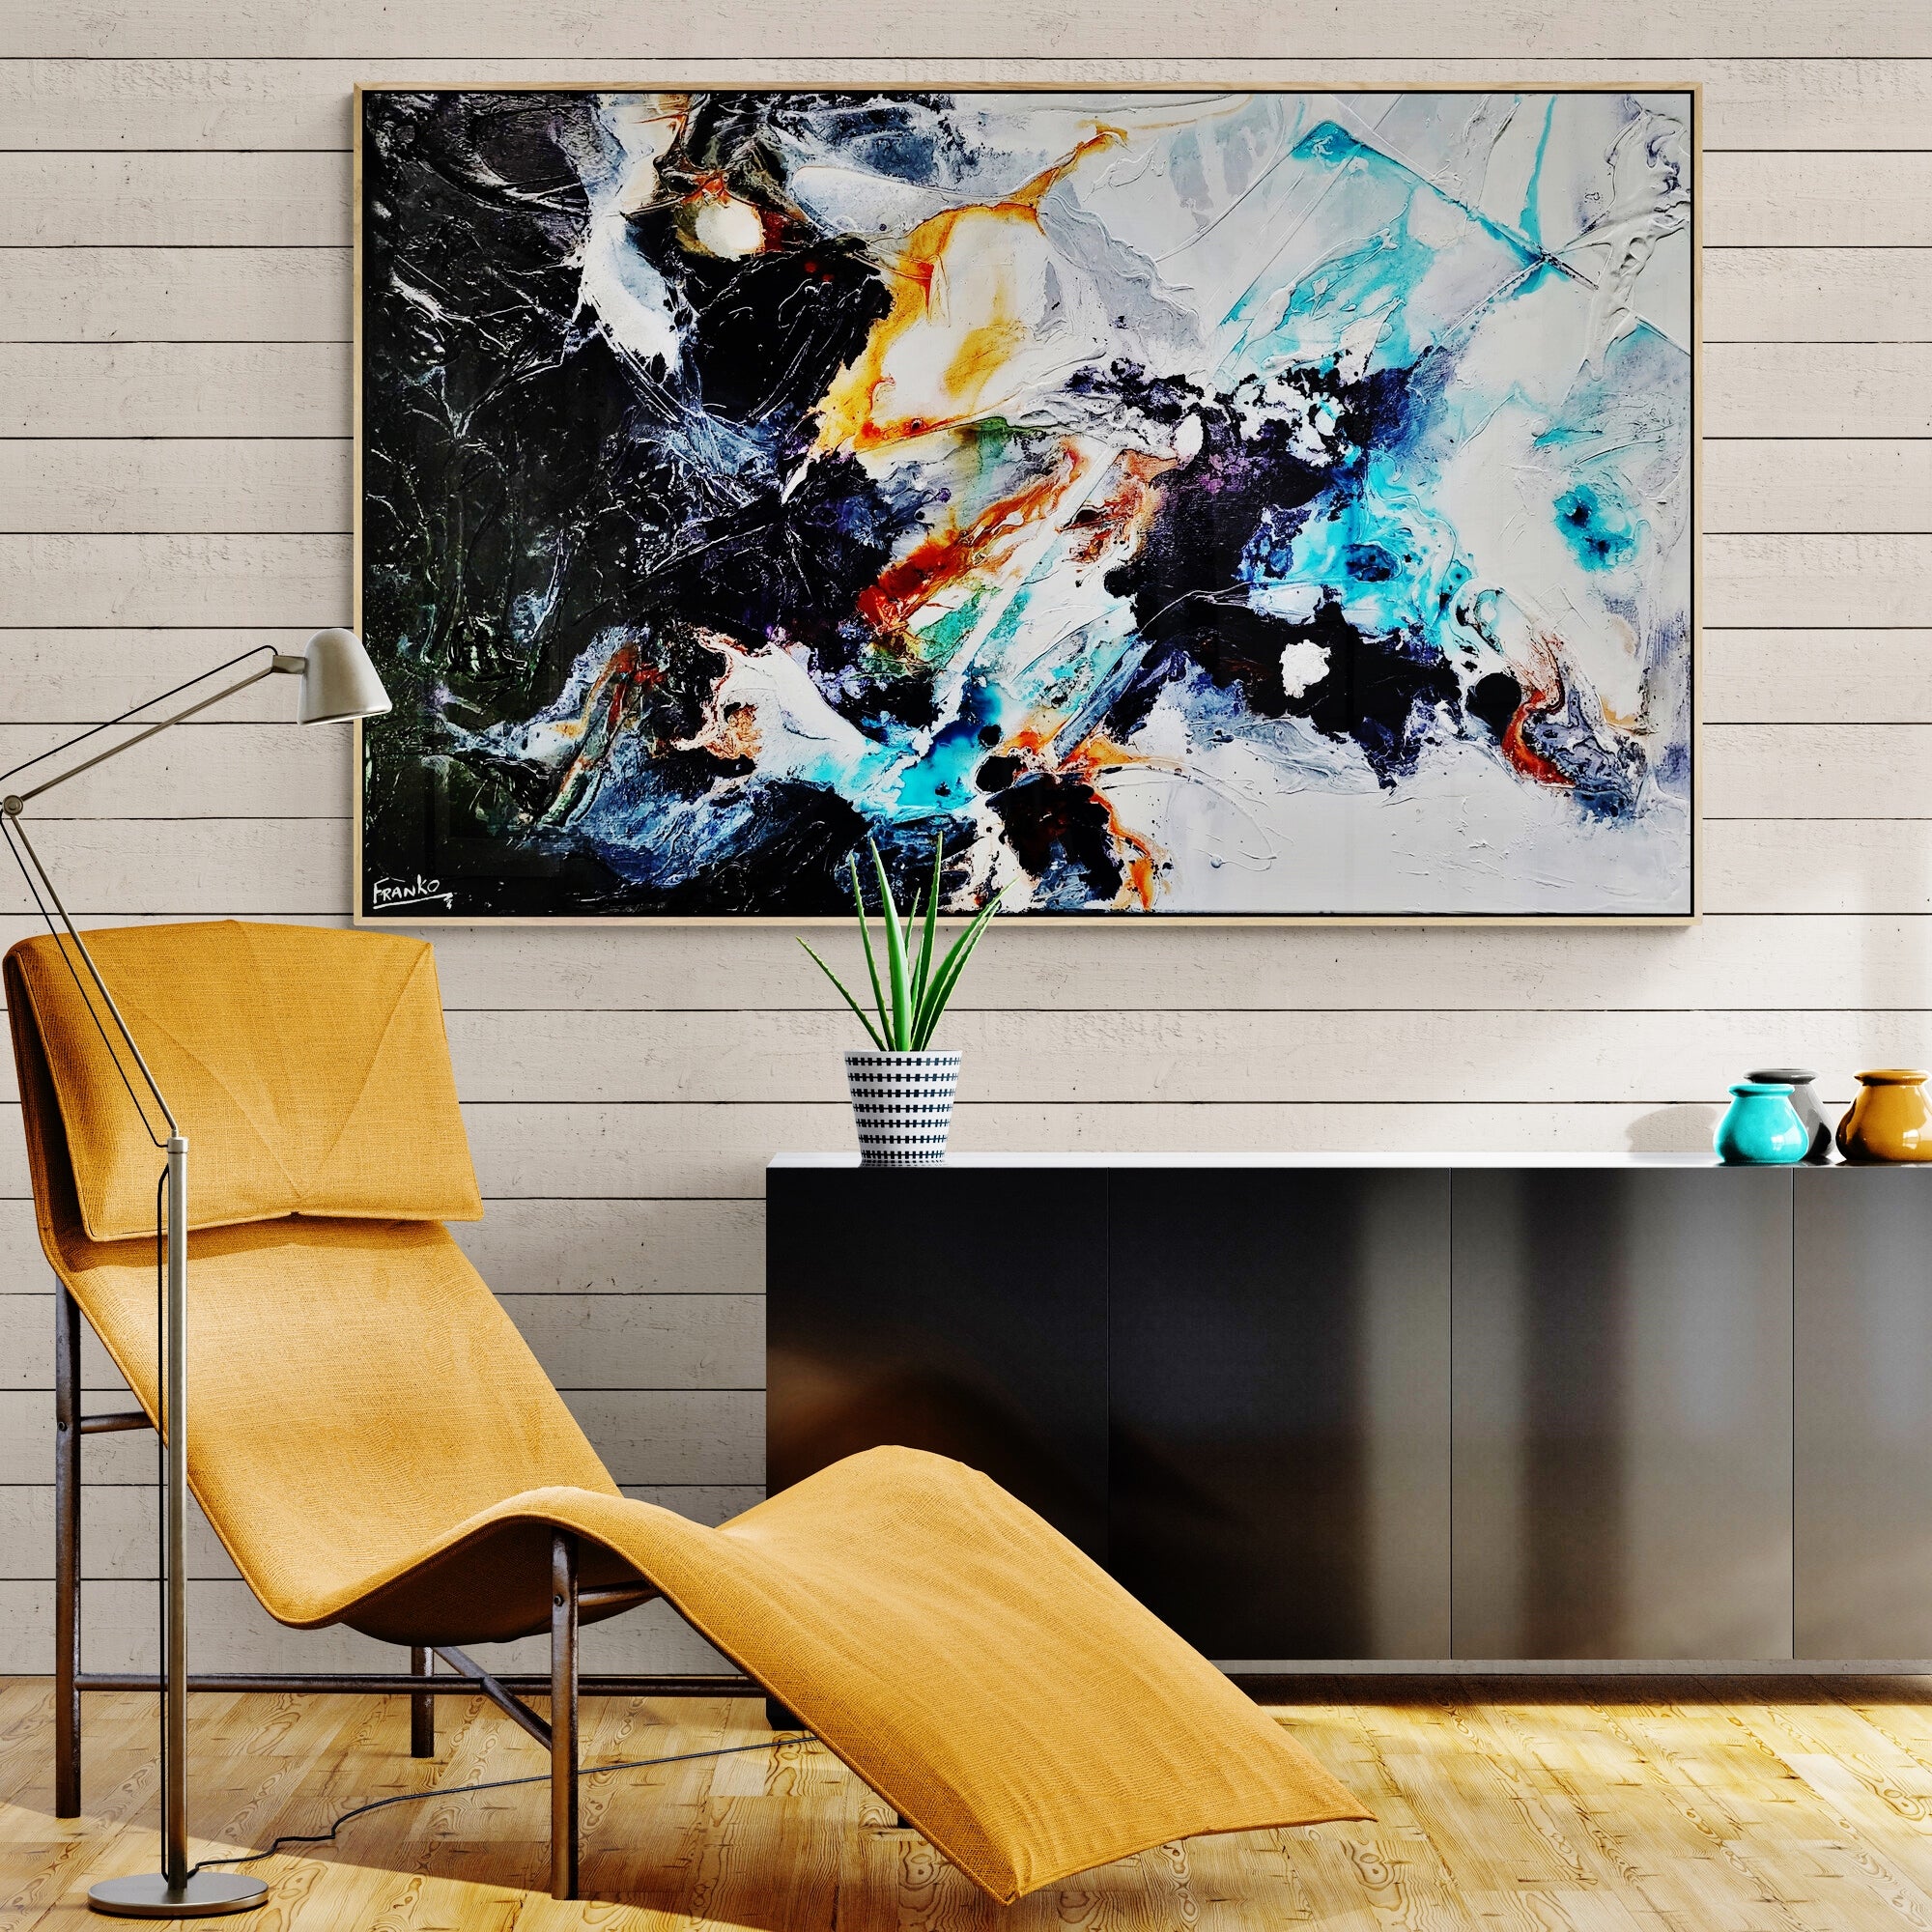 Rust Frenzy  160cm x 100cm Black Oxide Rust Textured Abstract Painting (SOLD)